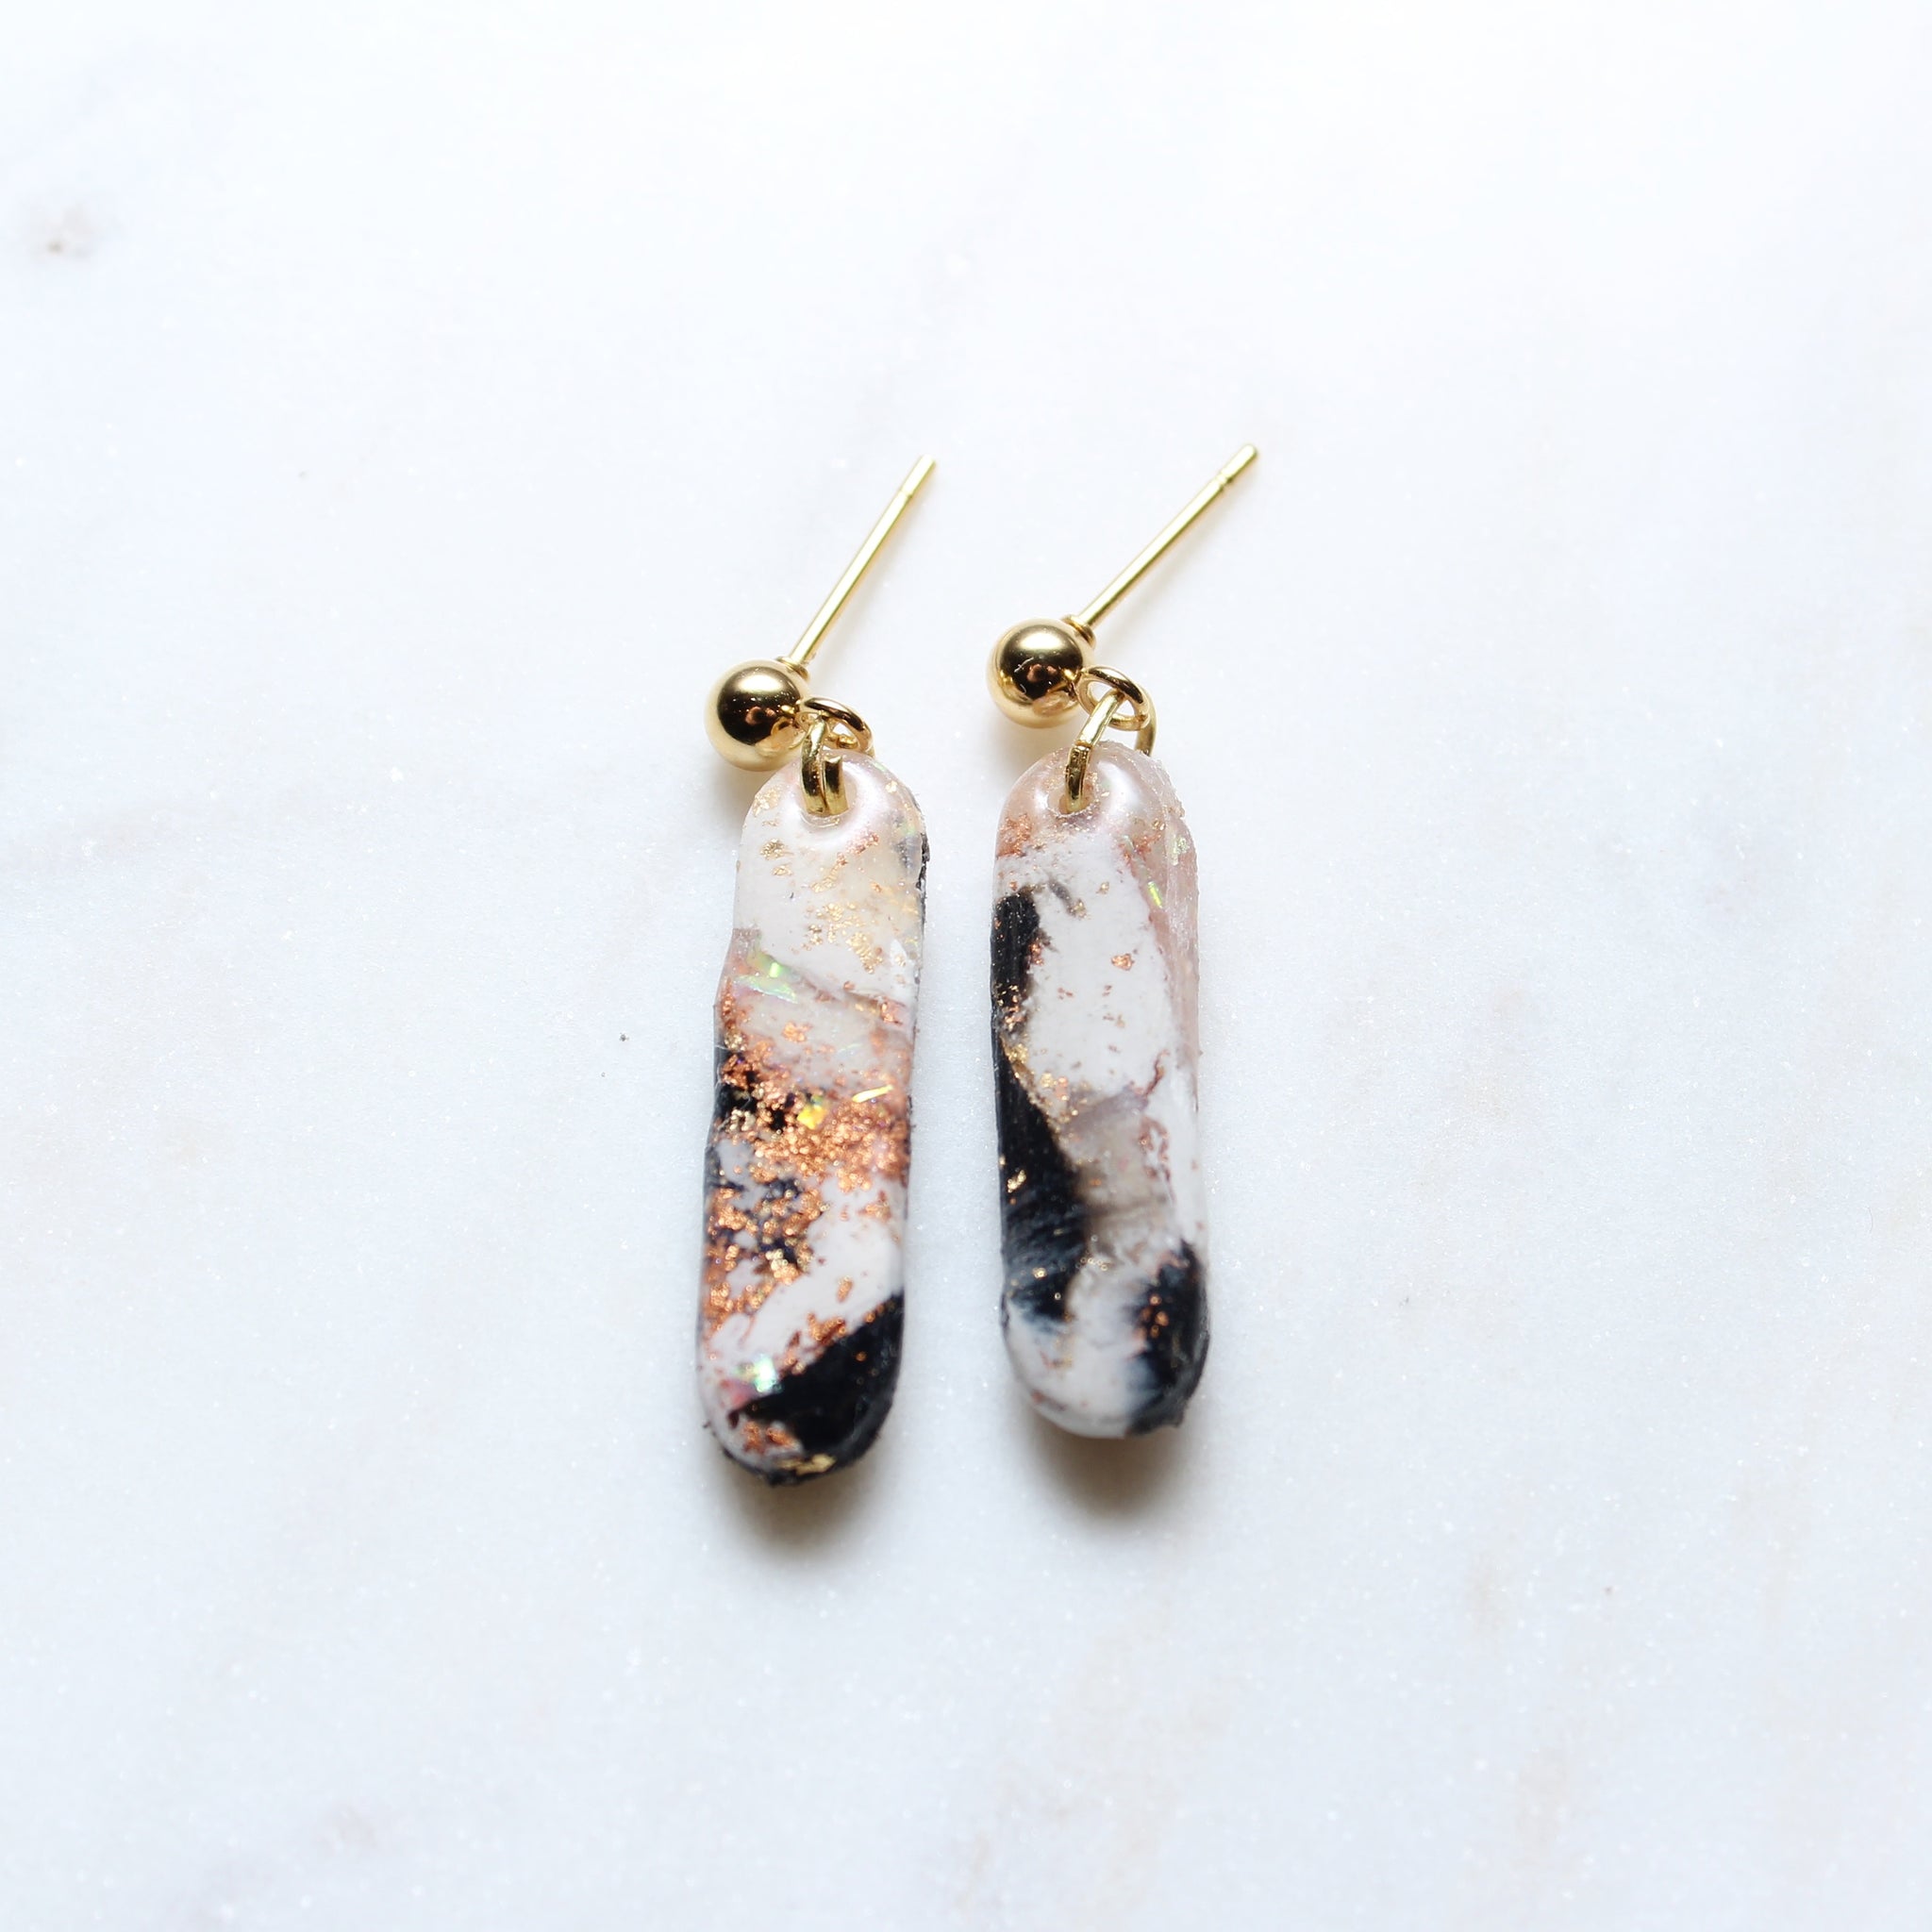 Black, White, Gold and Rose Gold Skinny Oval Earrings